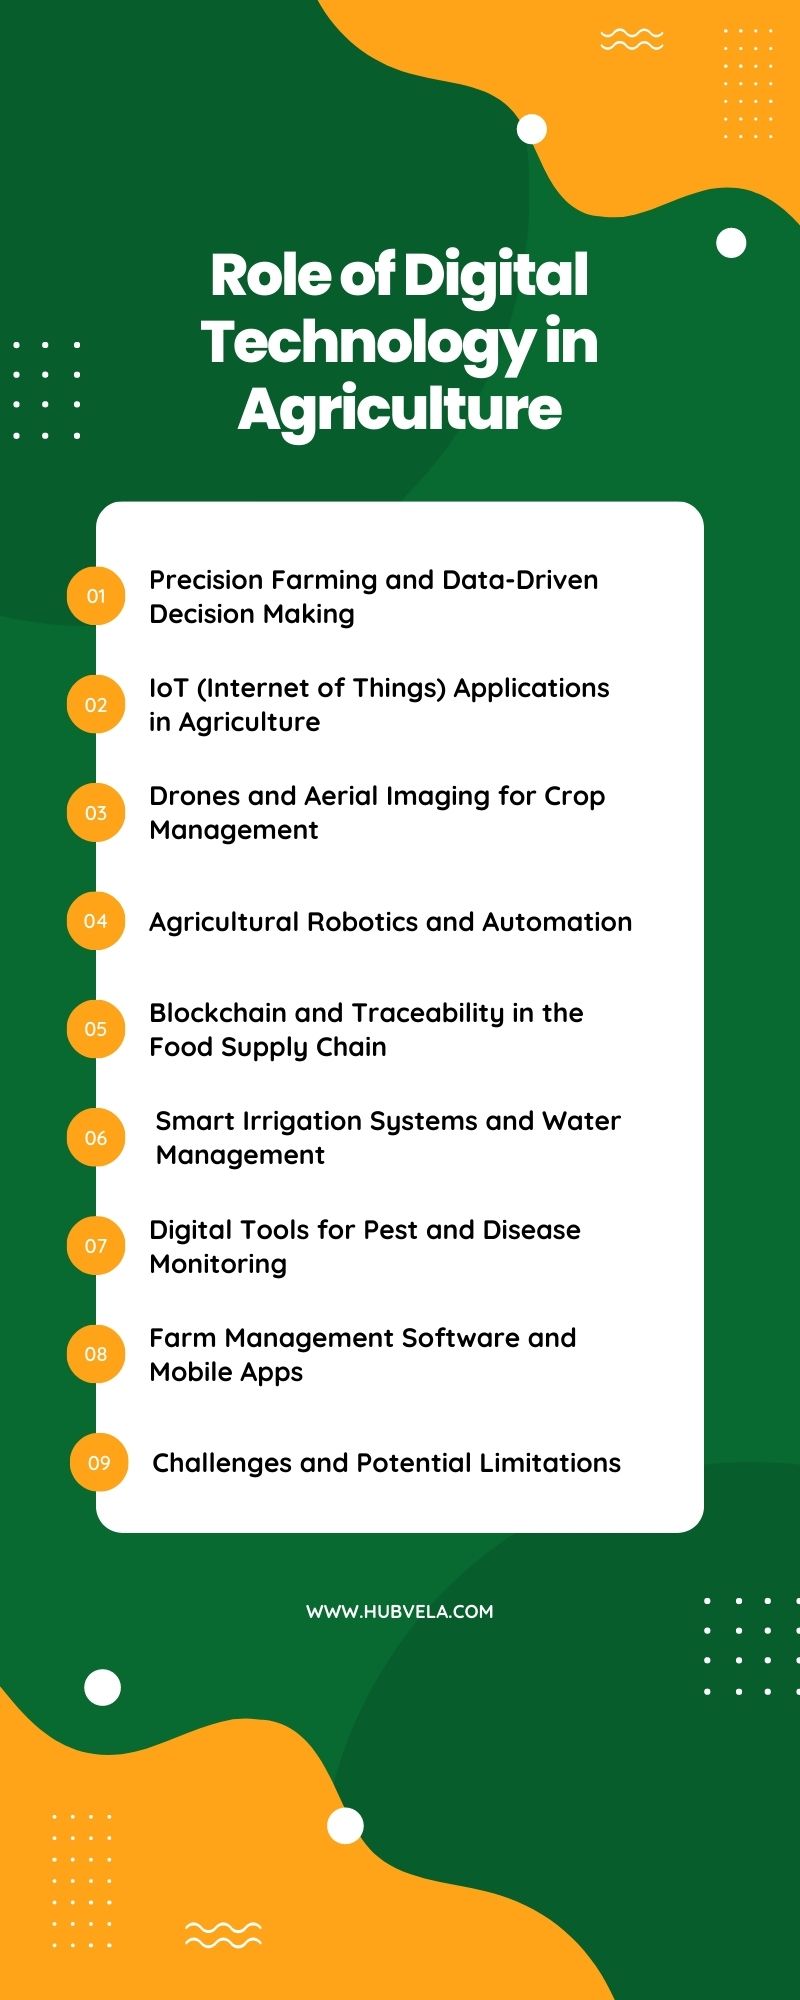 Role of Digital Technology in Agriculture Infographic